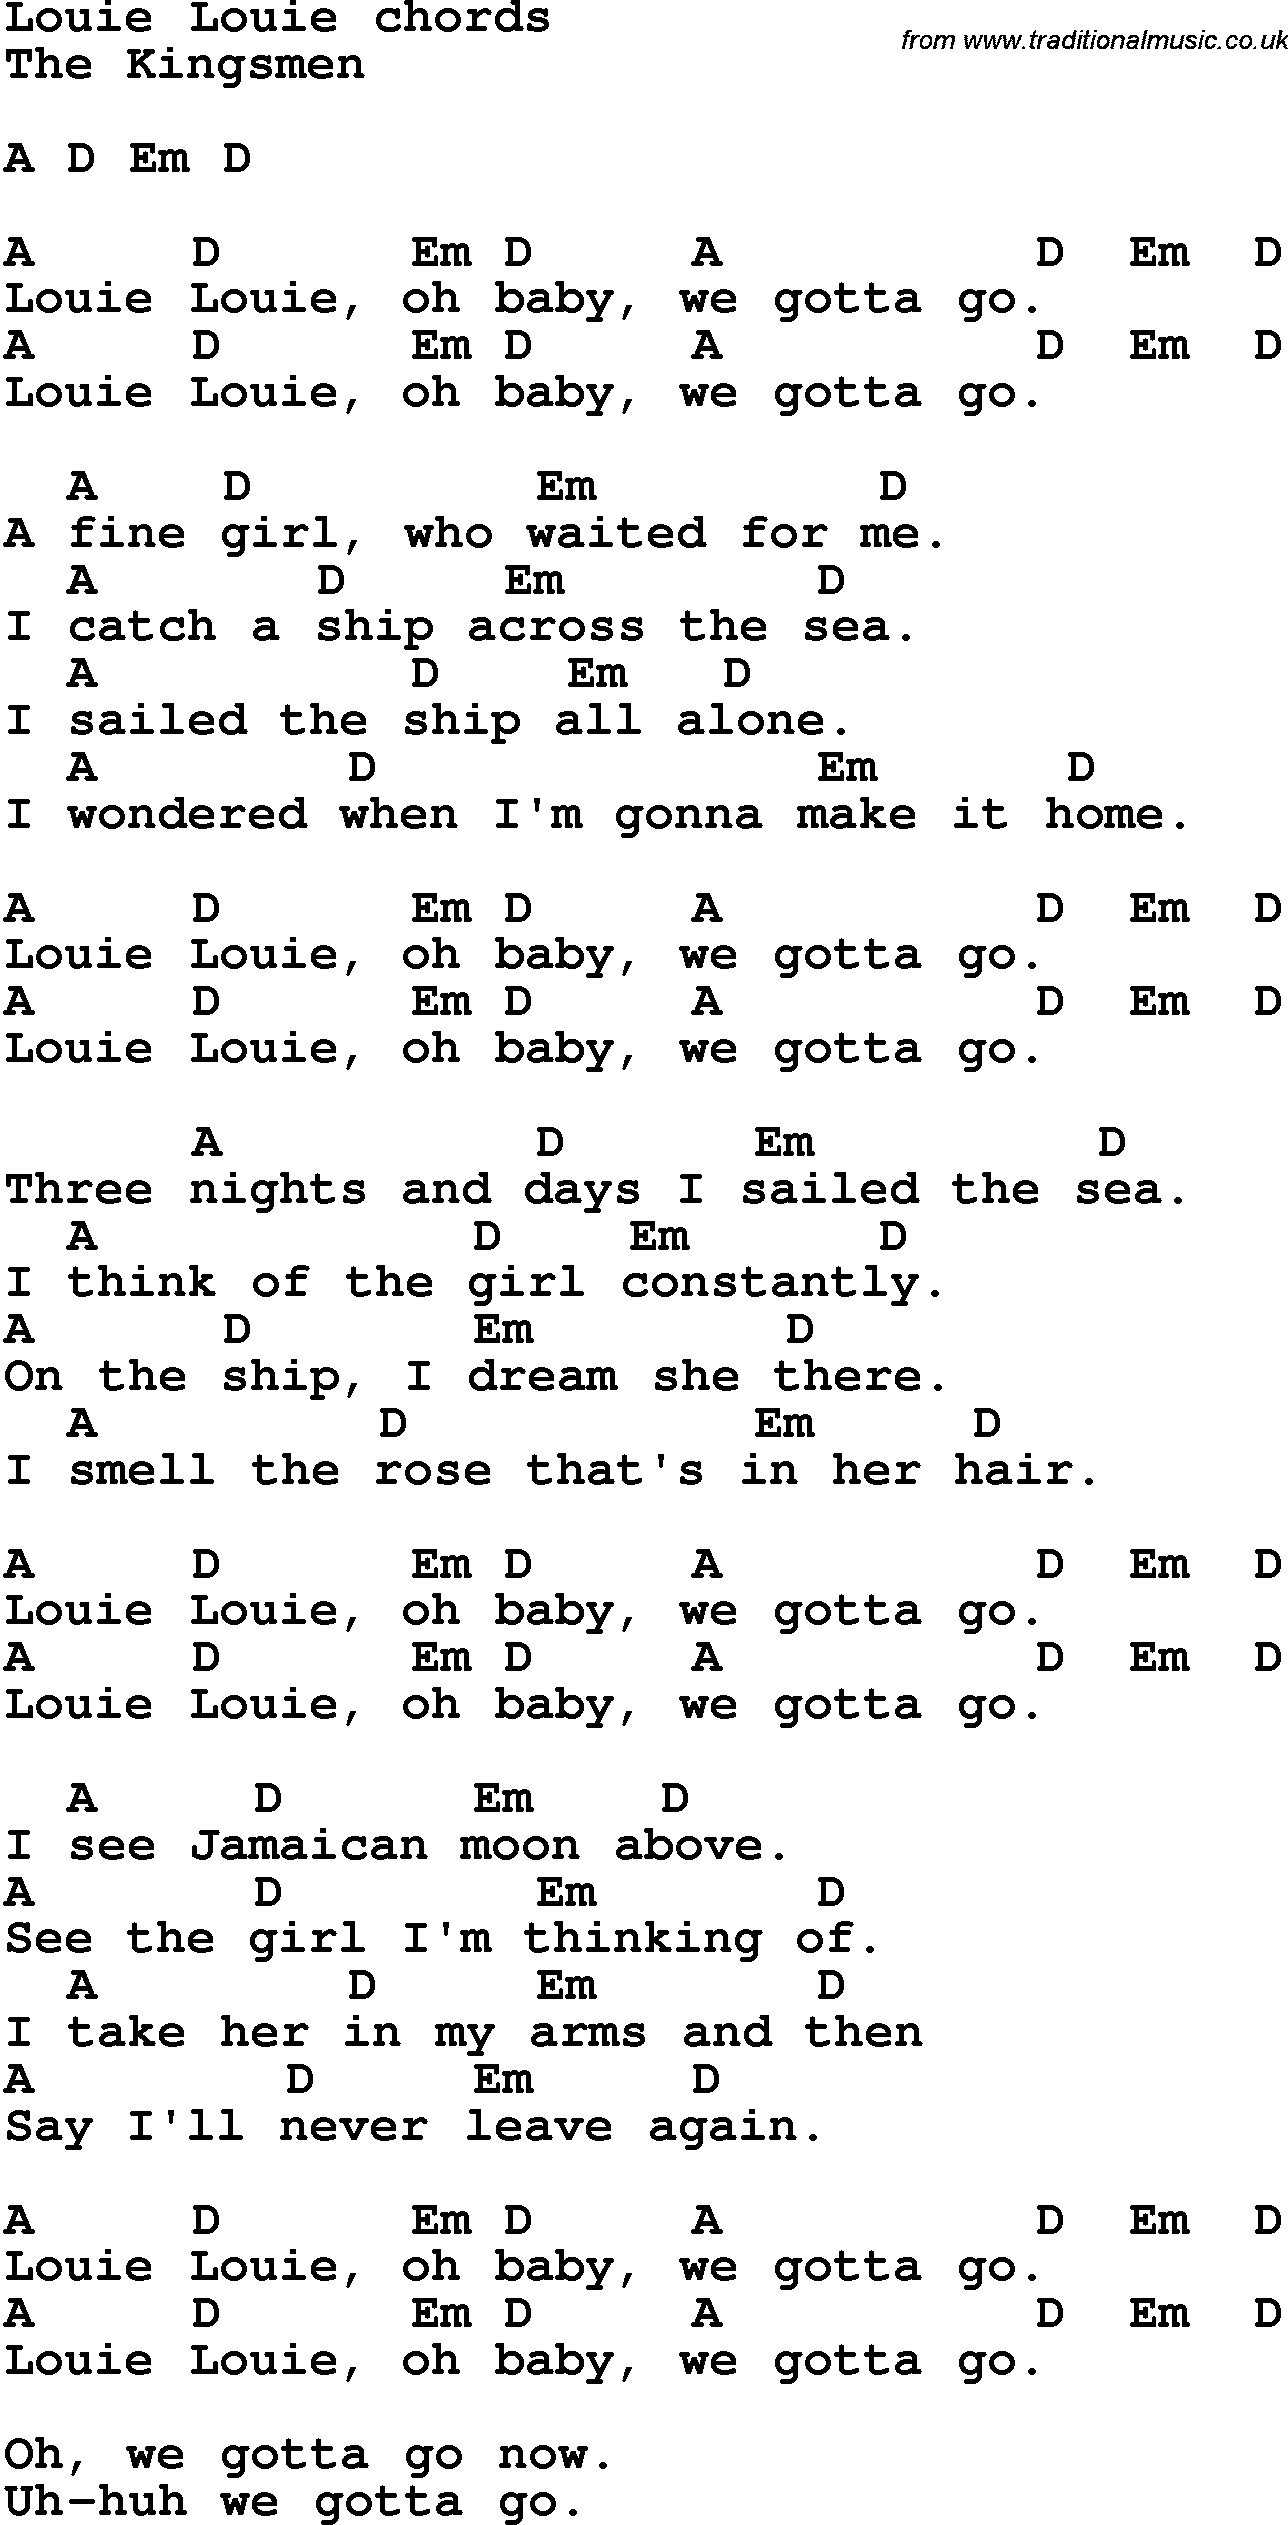 Song Lyrics with guitar chords for Louie Louie